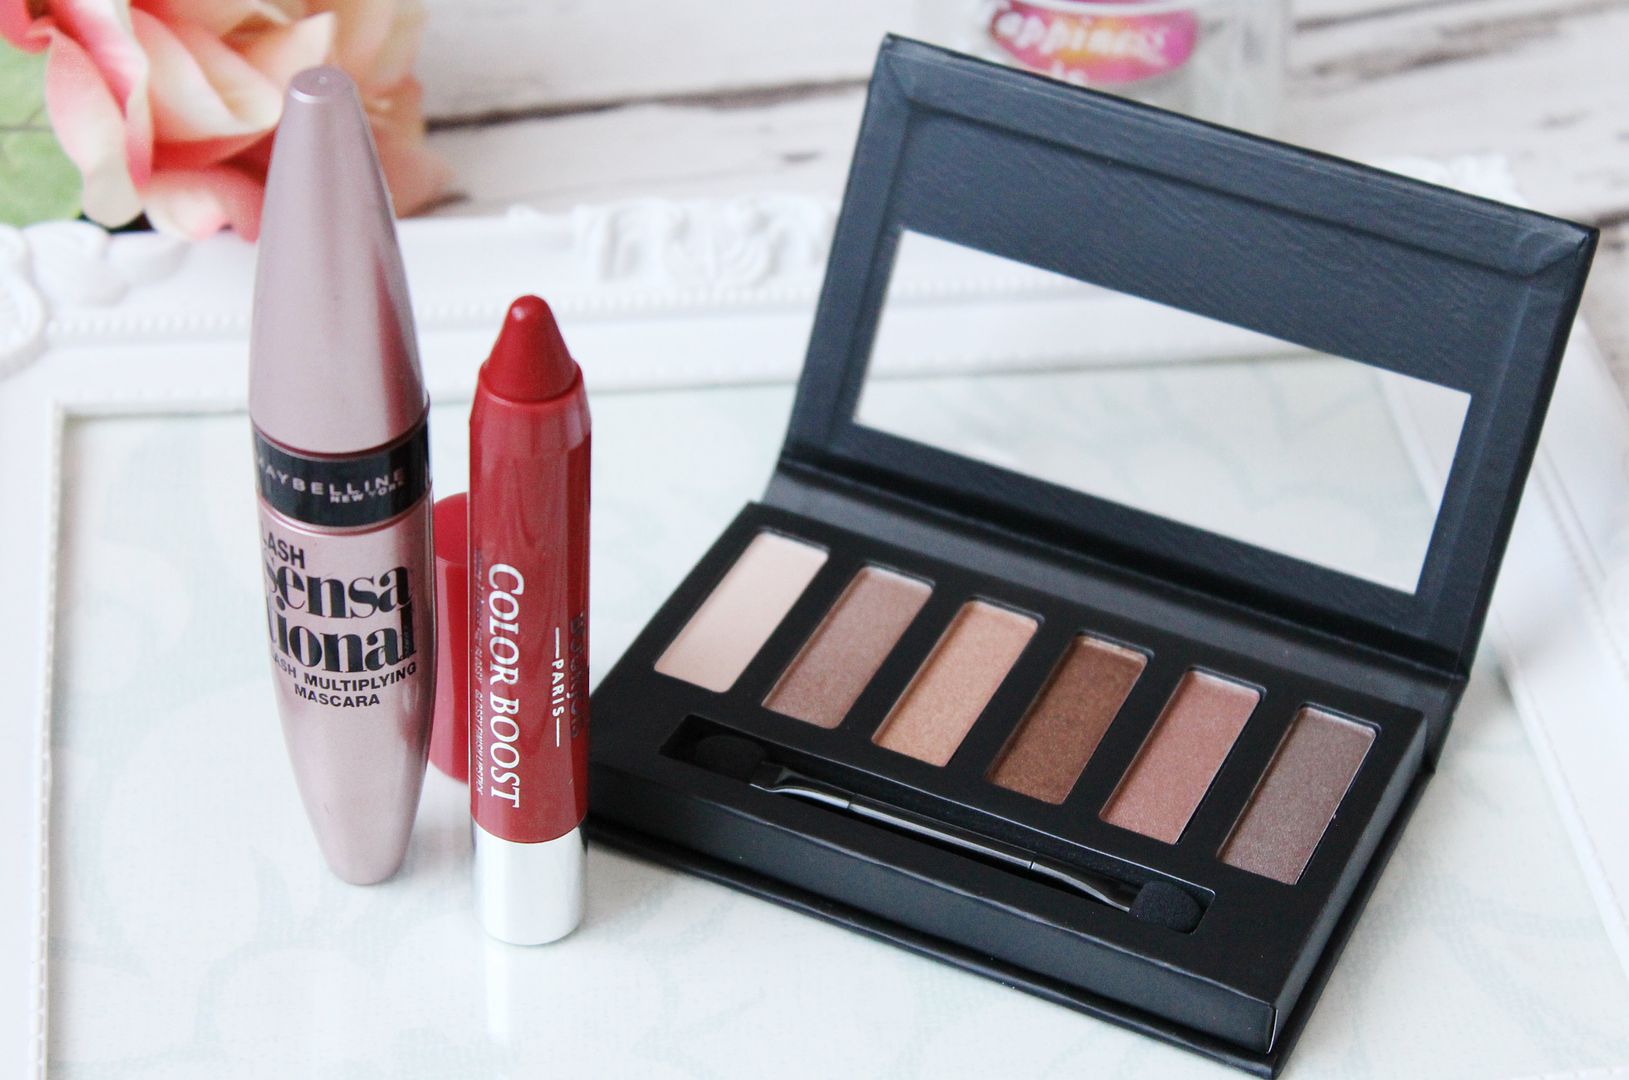 Boots-Spring-Summer-Makeup-Haul-2015-Bourjois-Colour-Boost-Sweet-Macchiato-Maybellibe-Lash-Sensational-Collection-Eyes-Uncovered-Belle-Amie-UK-Beauty-Fashion-Lifestyle-Blog